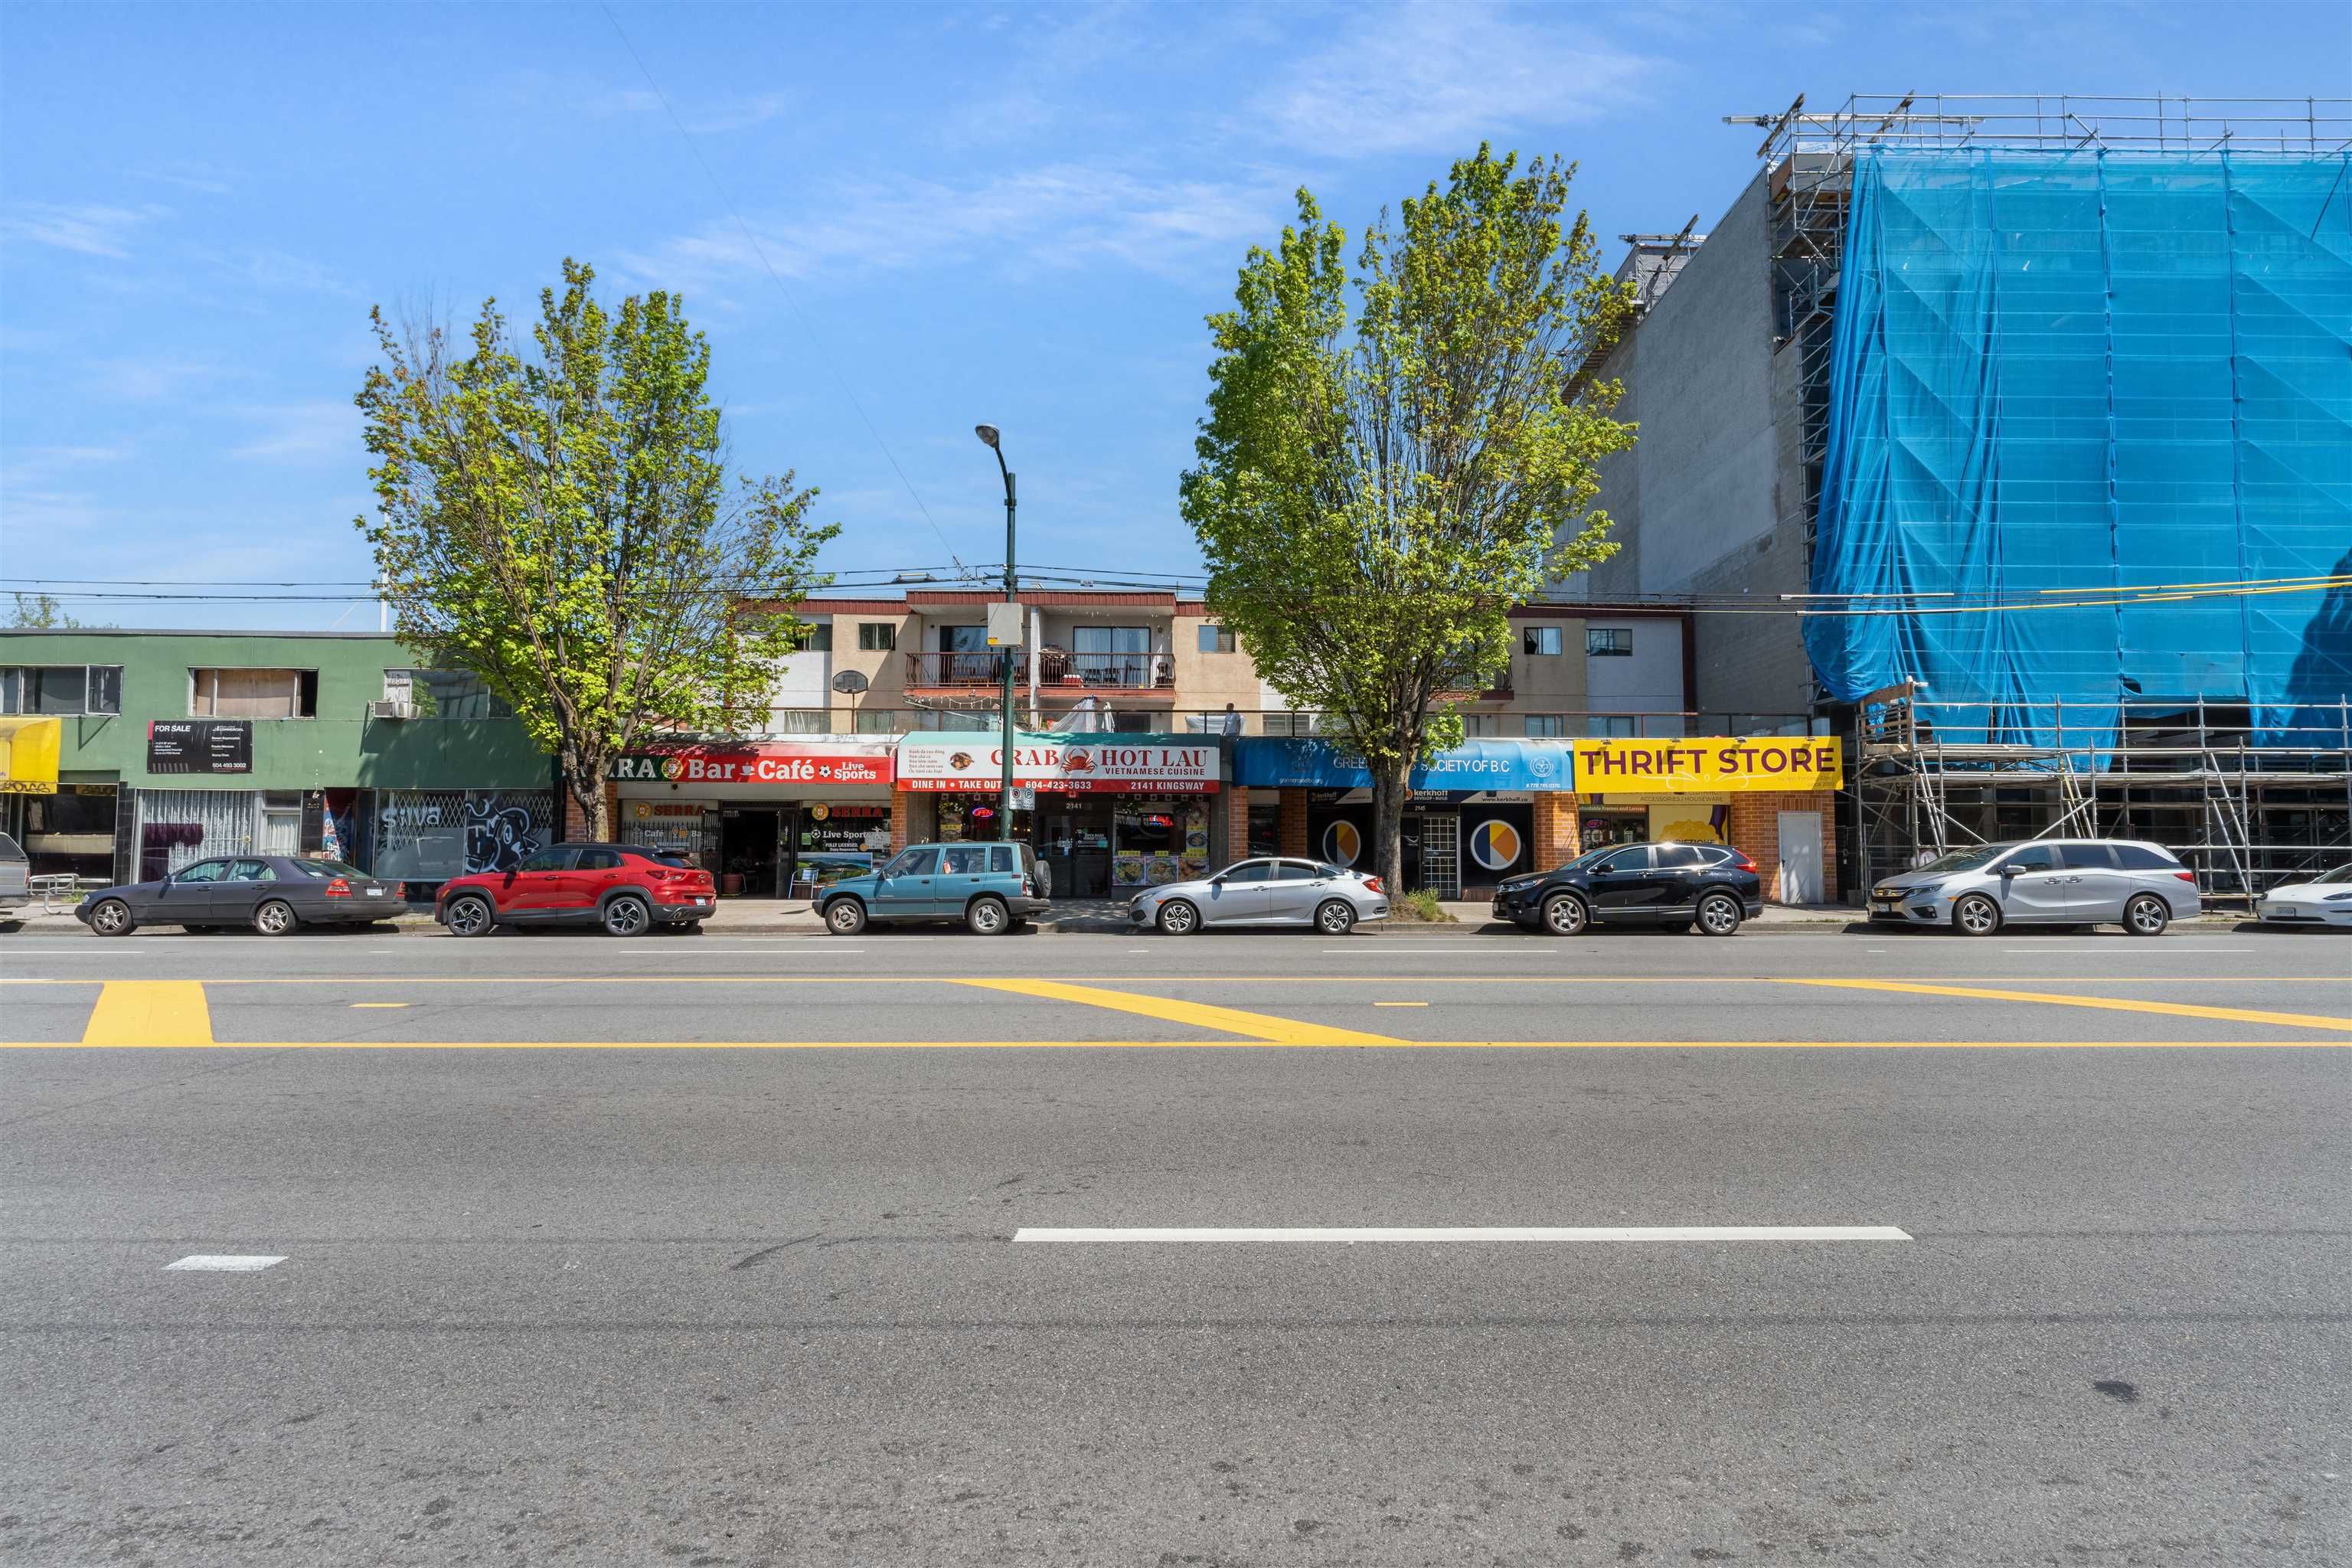 Main Photo: 2139-2147 KINGSWAY in Vancouver: Victoria VE Land Commercial for sale (Vancouver East)  : MLS®# C8051617